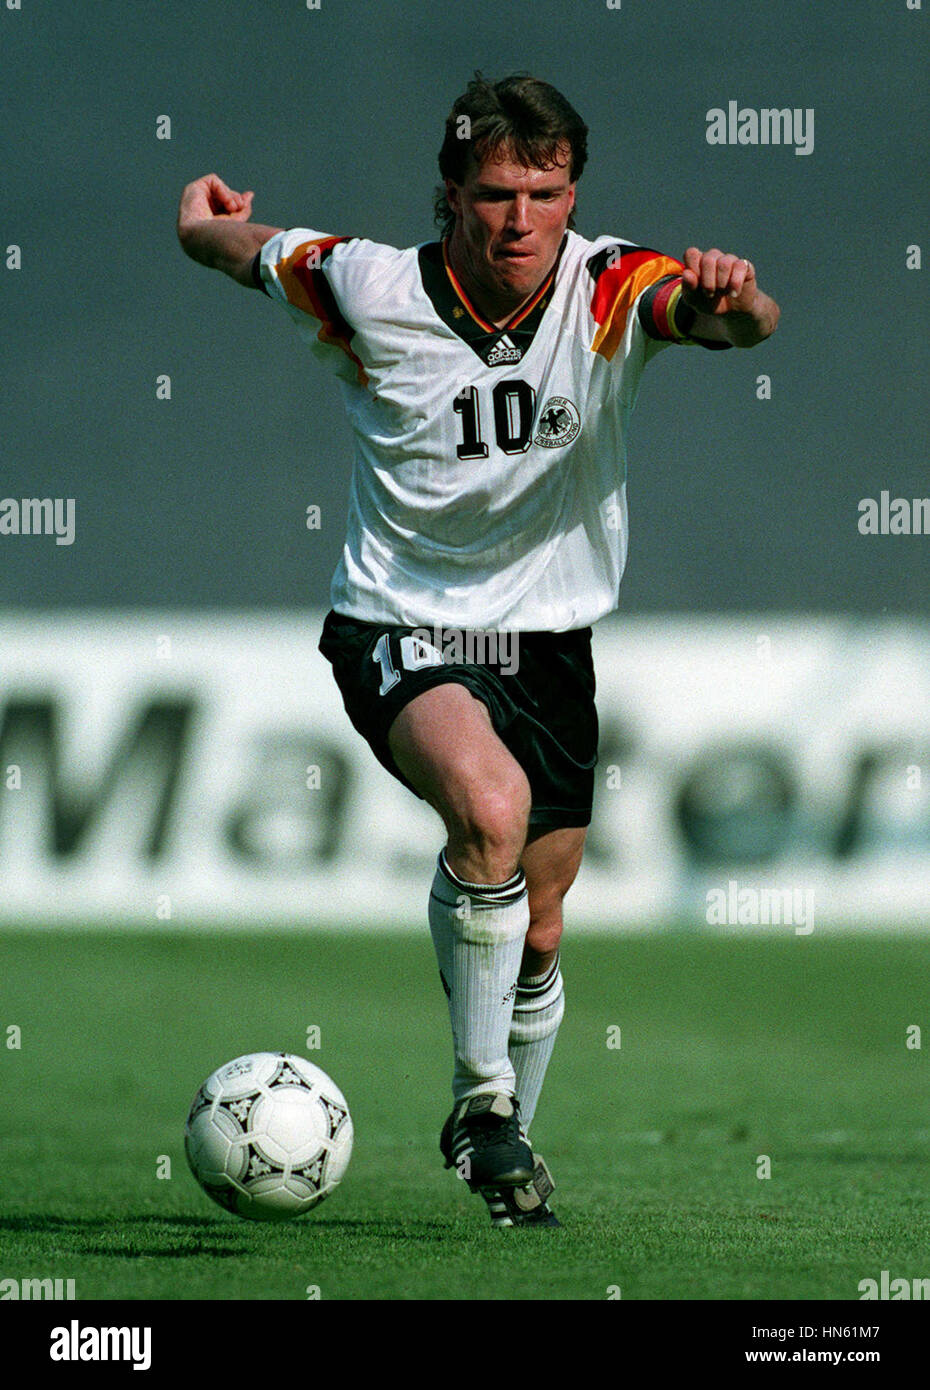 24 Lothar Krüger Photos & High Res Pictures - Getty Images